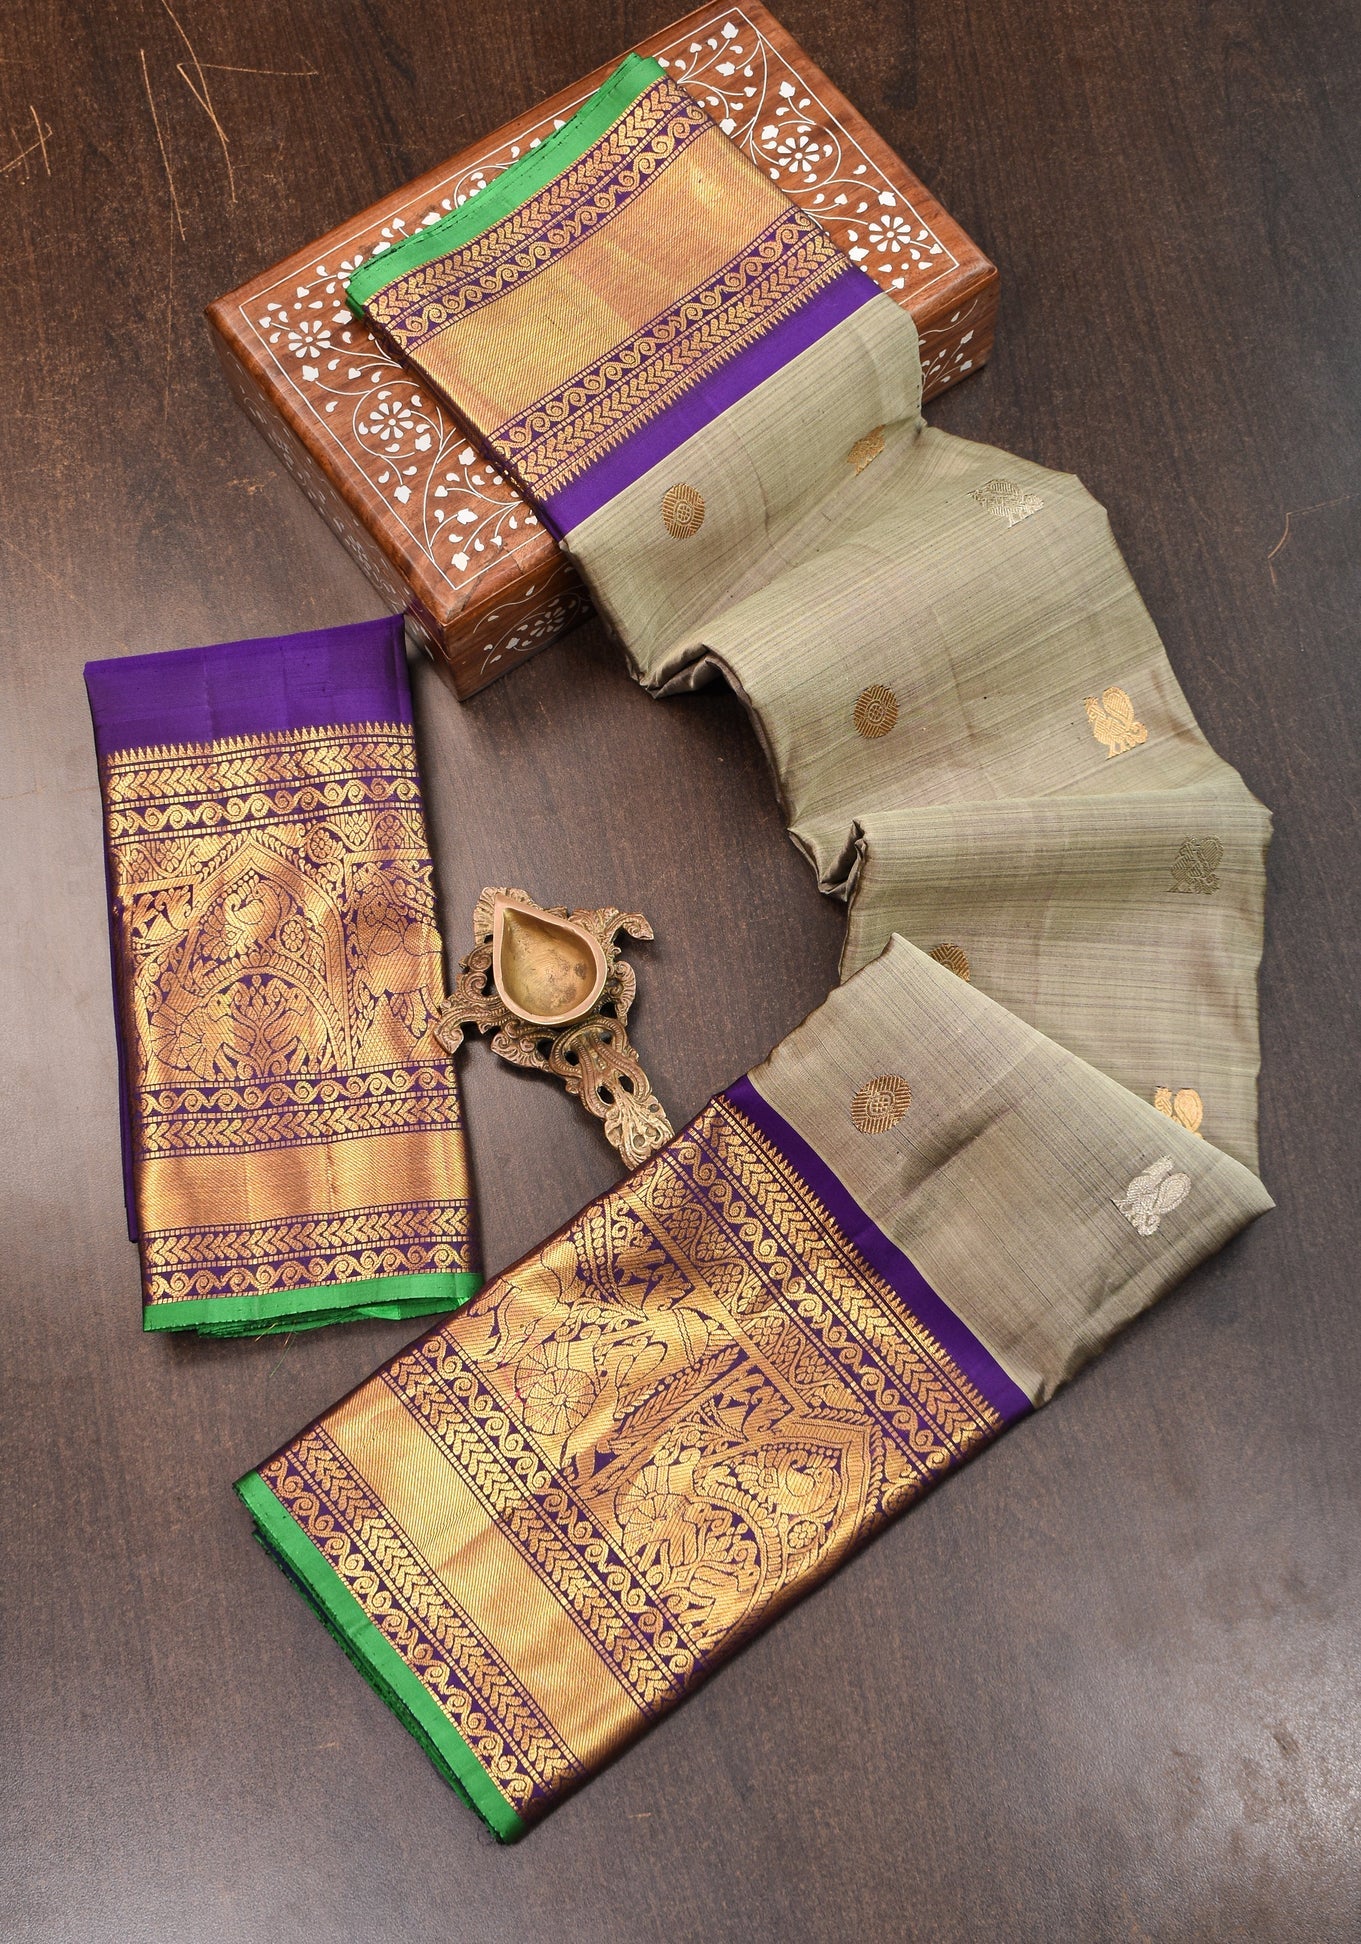 Preorder: Exquisite Handwoven Gadwal Pure Silk Saree in Gray and Purple with 11" wide zari Border | SILK MARK CERTIFIED